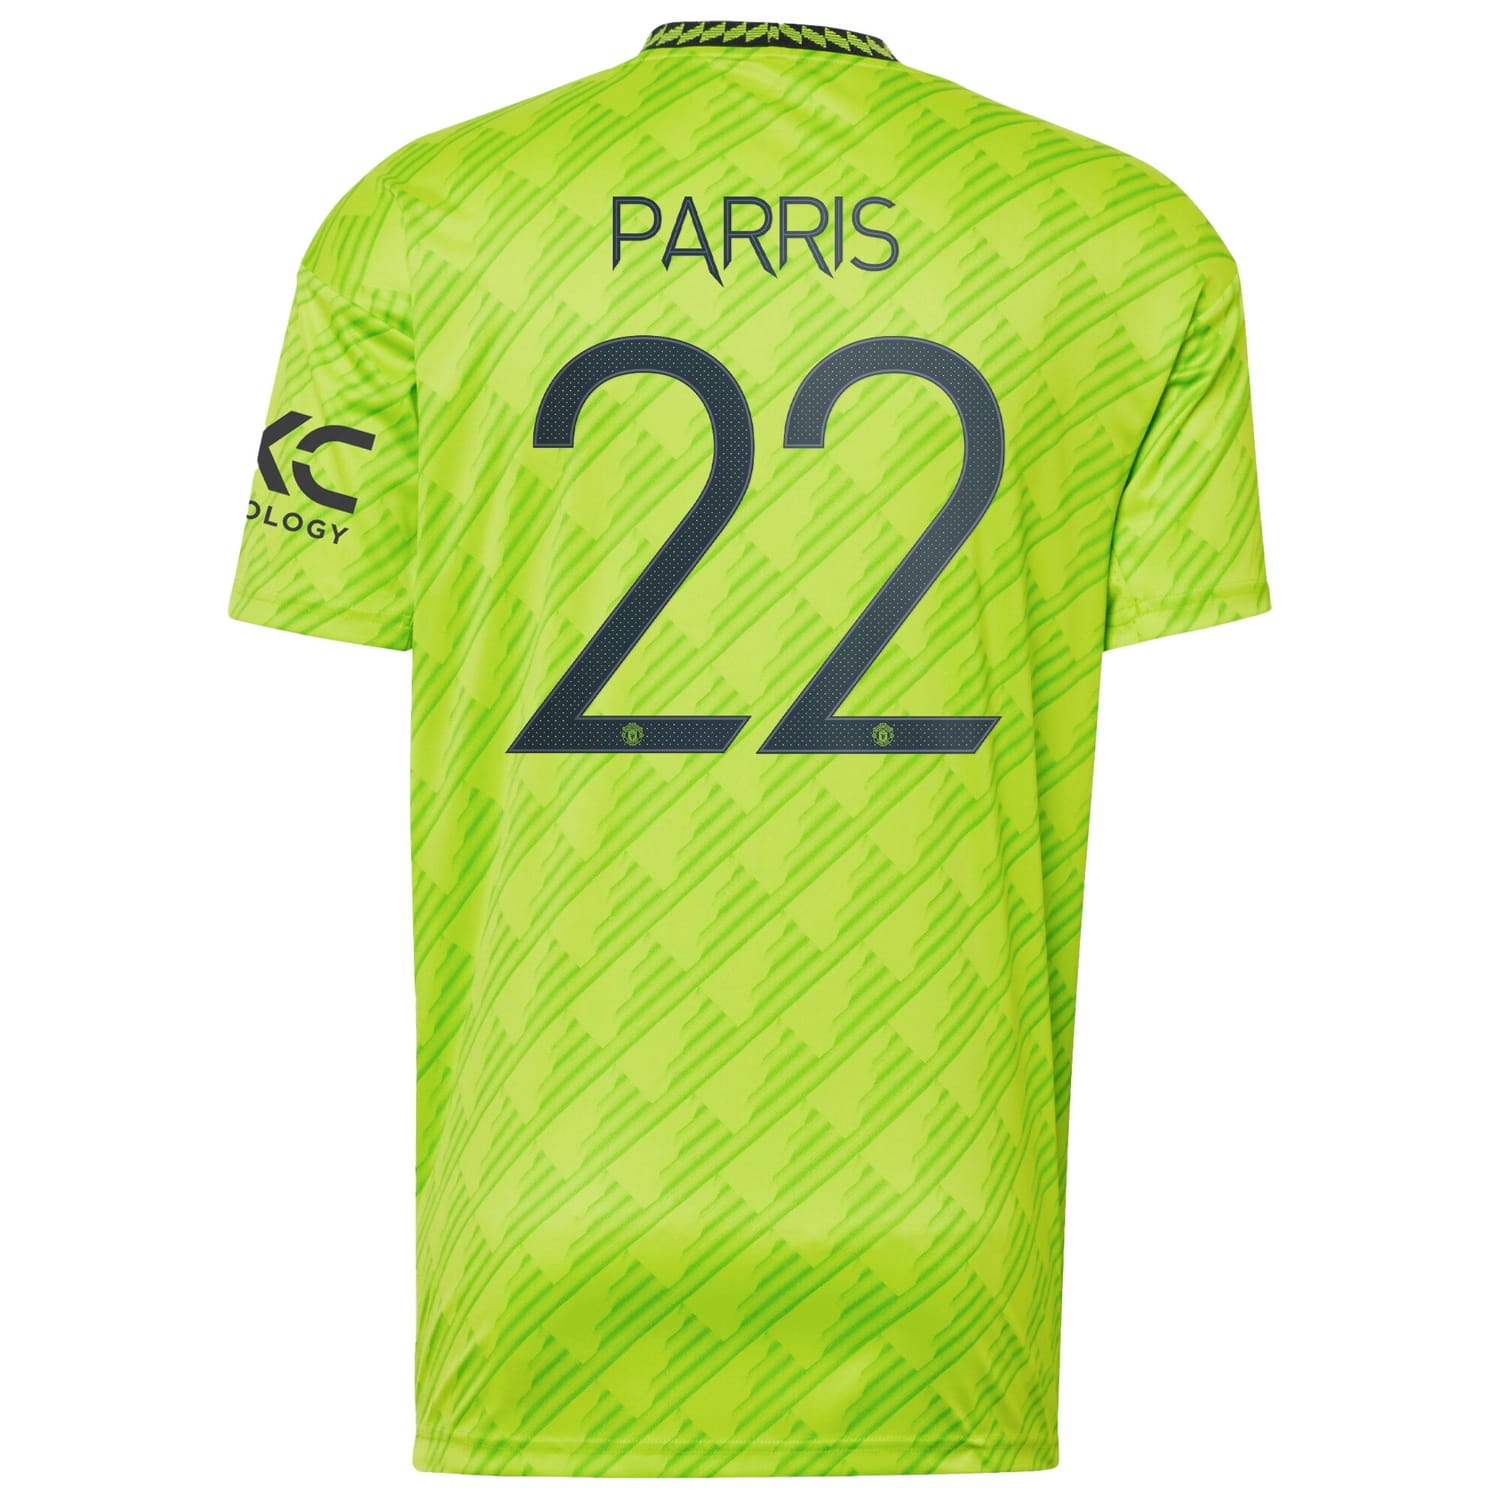 Premier League Manchester United Third Cup Jersey Shirt 2022-23 player Nikita Parris 22 printing for Men